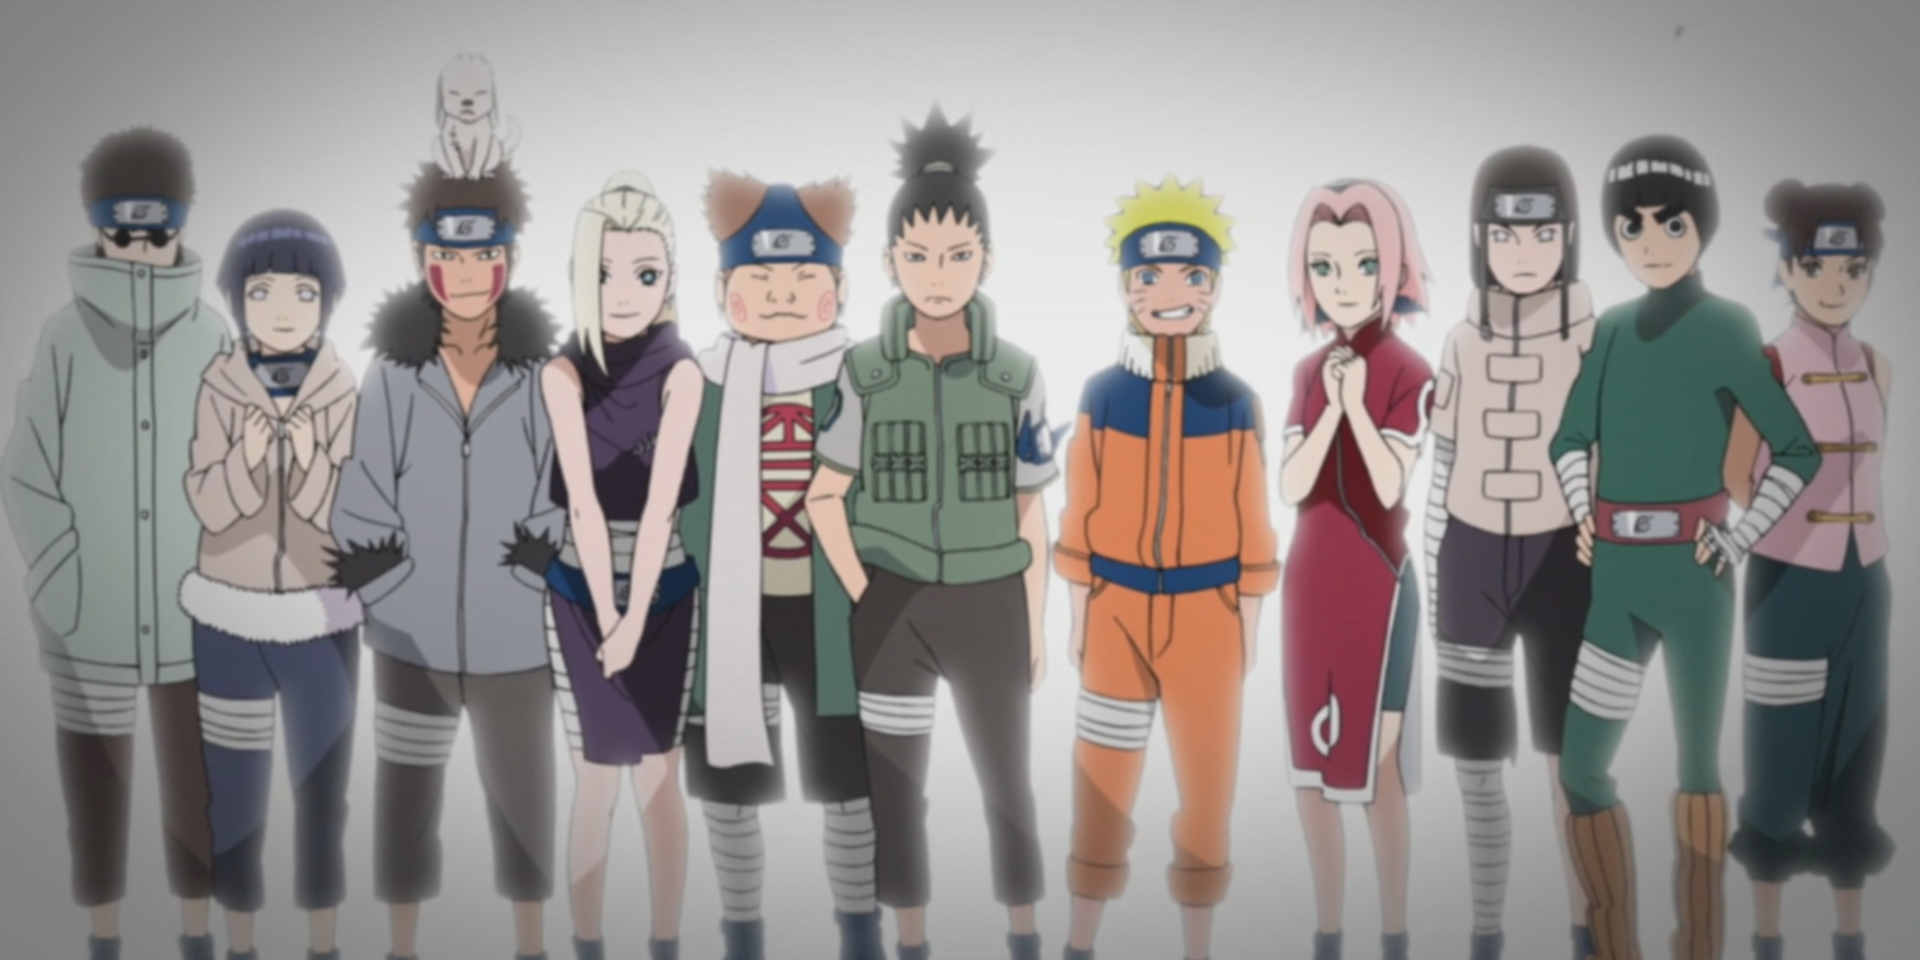 Naruto and the rest of the Konoha 11